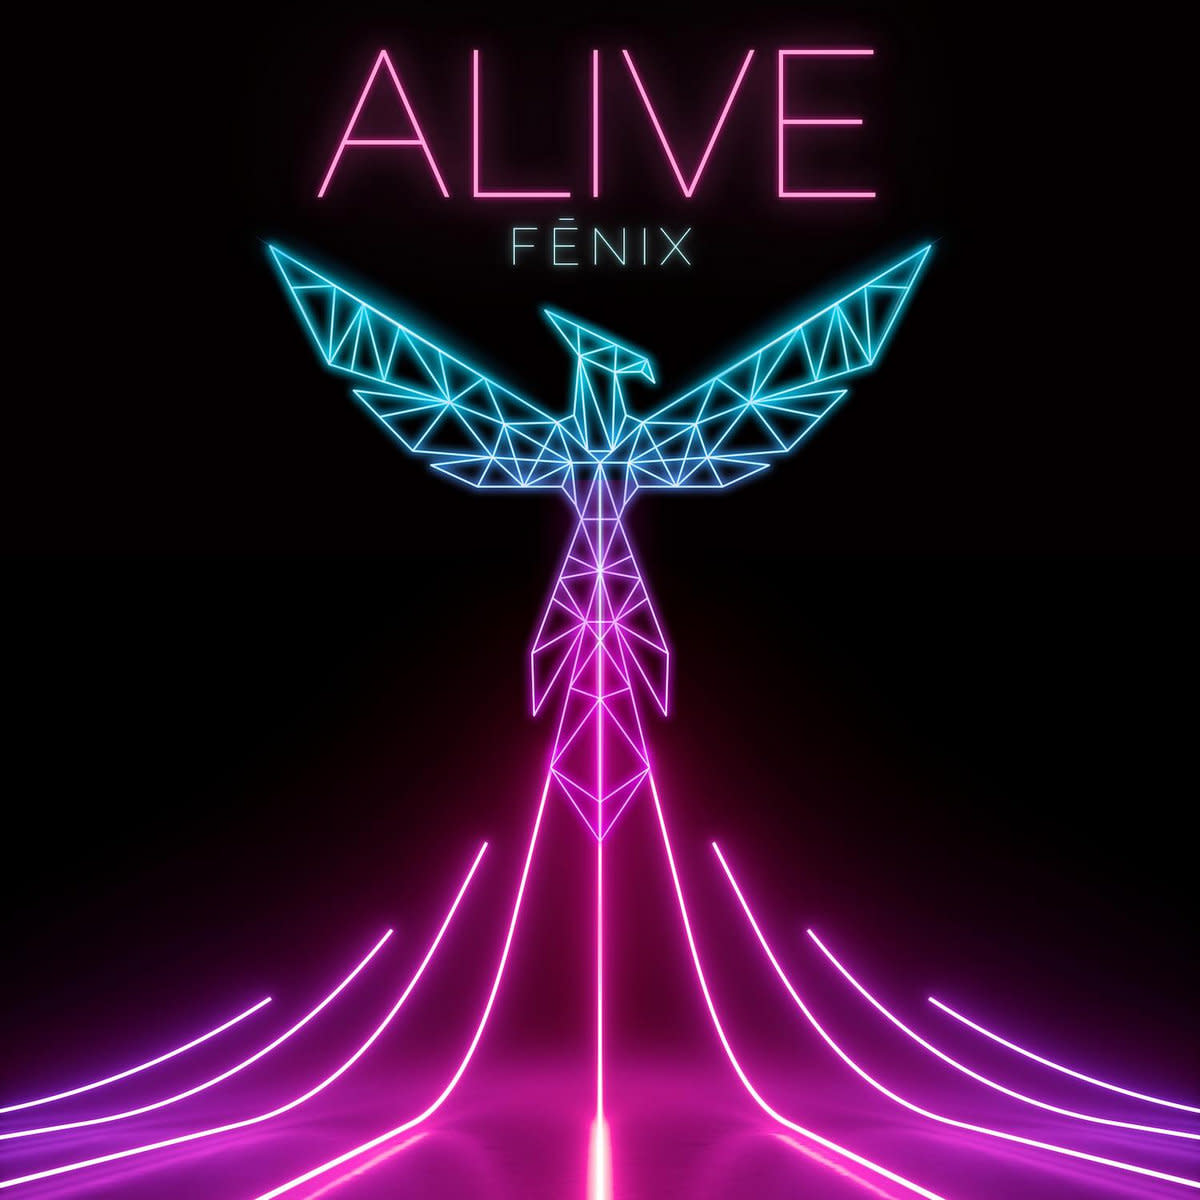 synth-single-review-alive-by-fnix